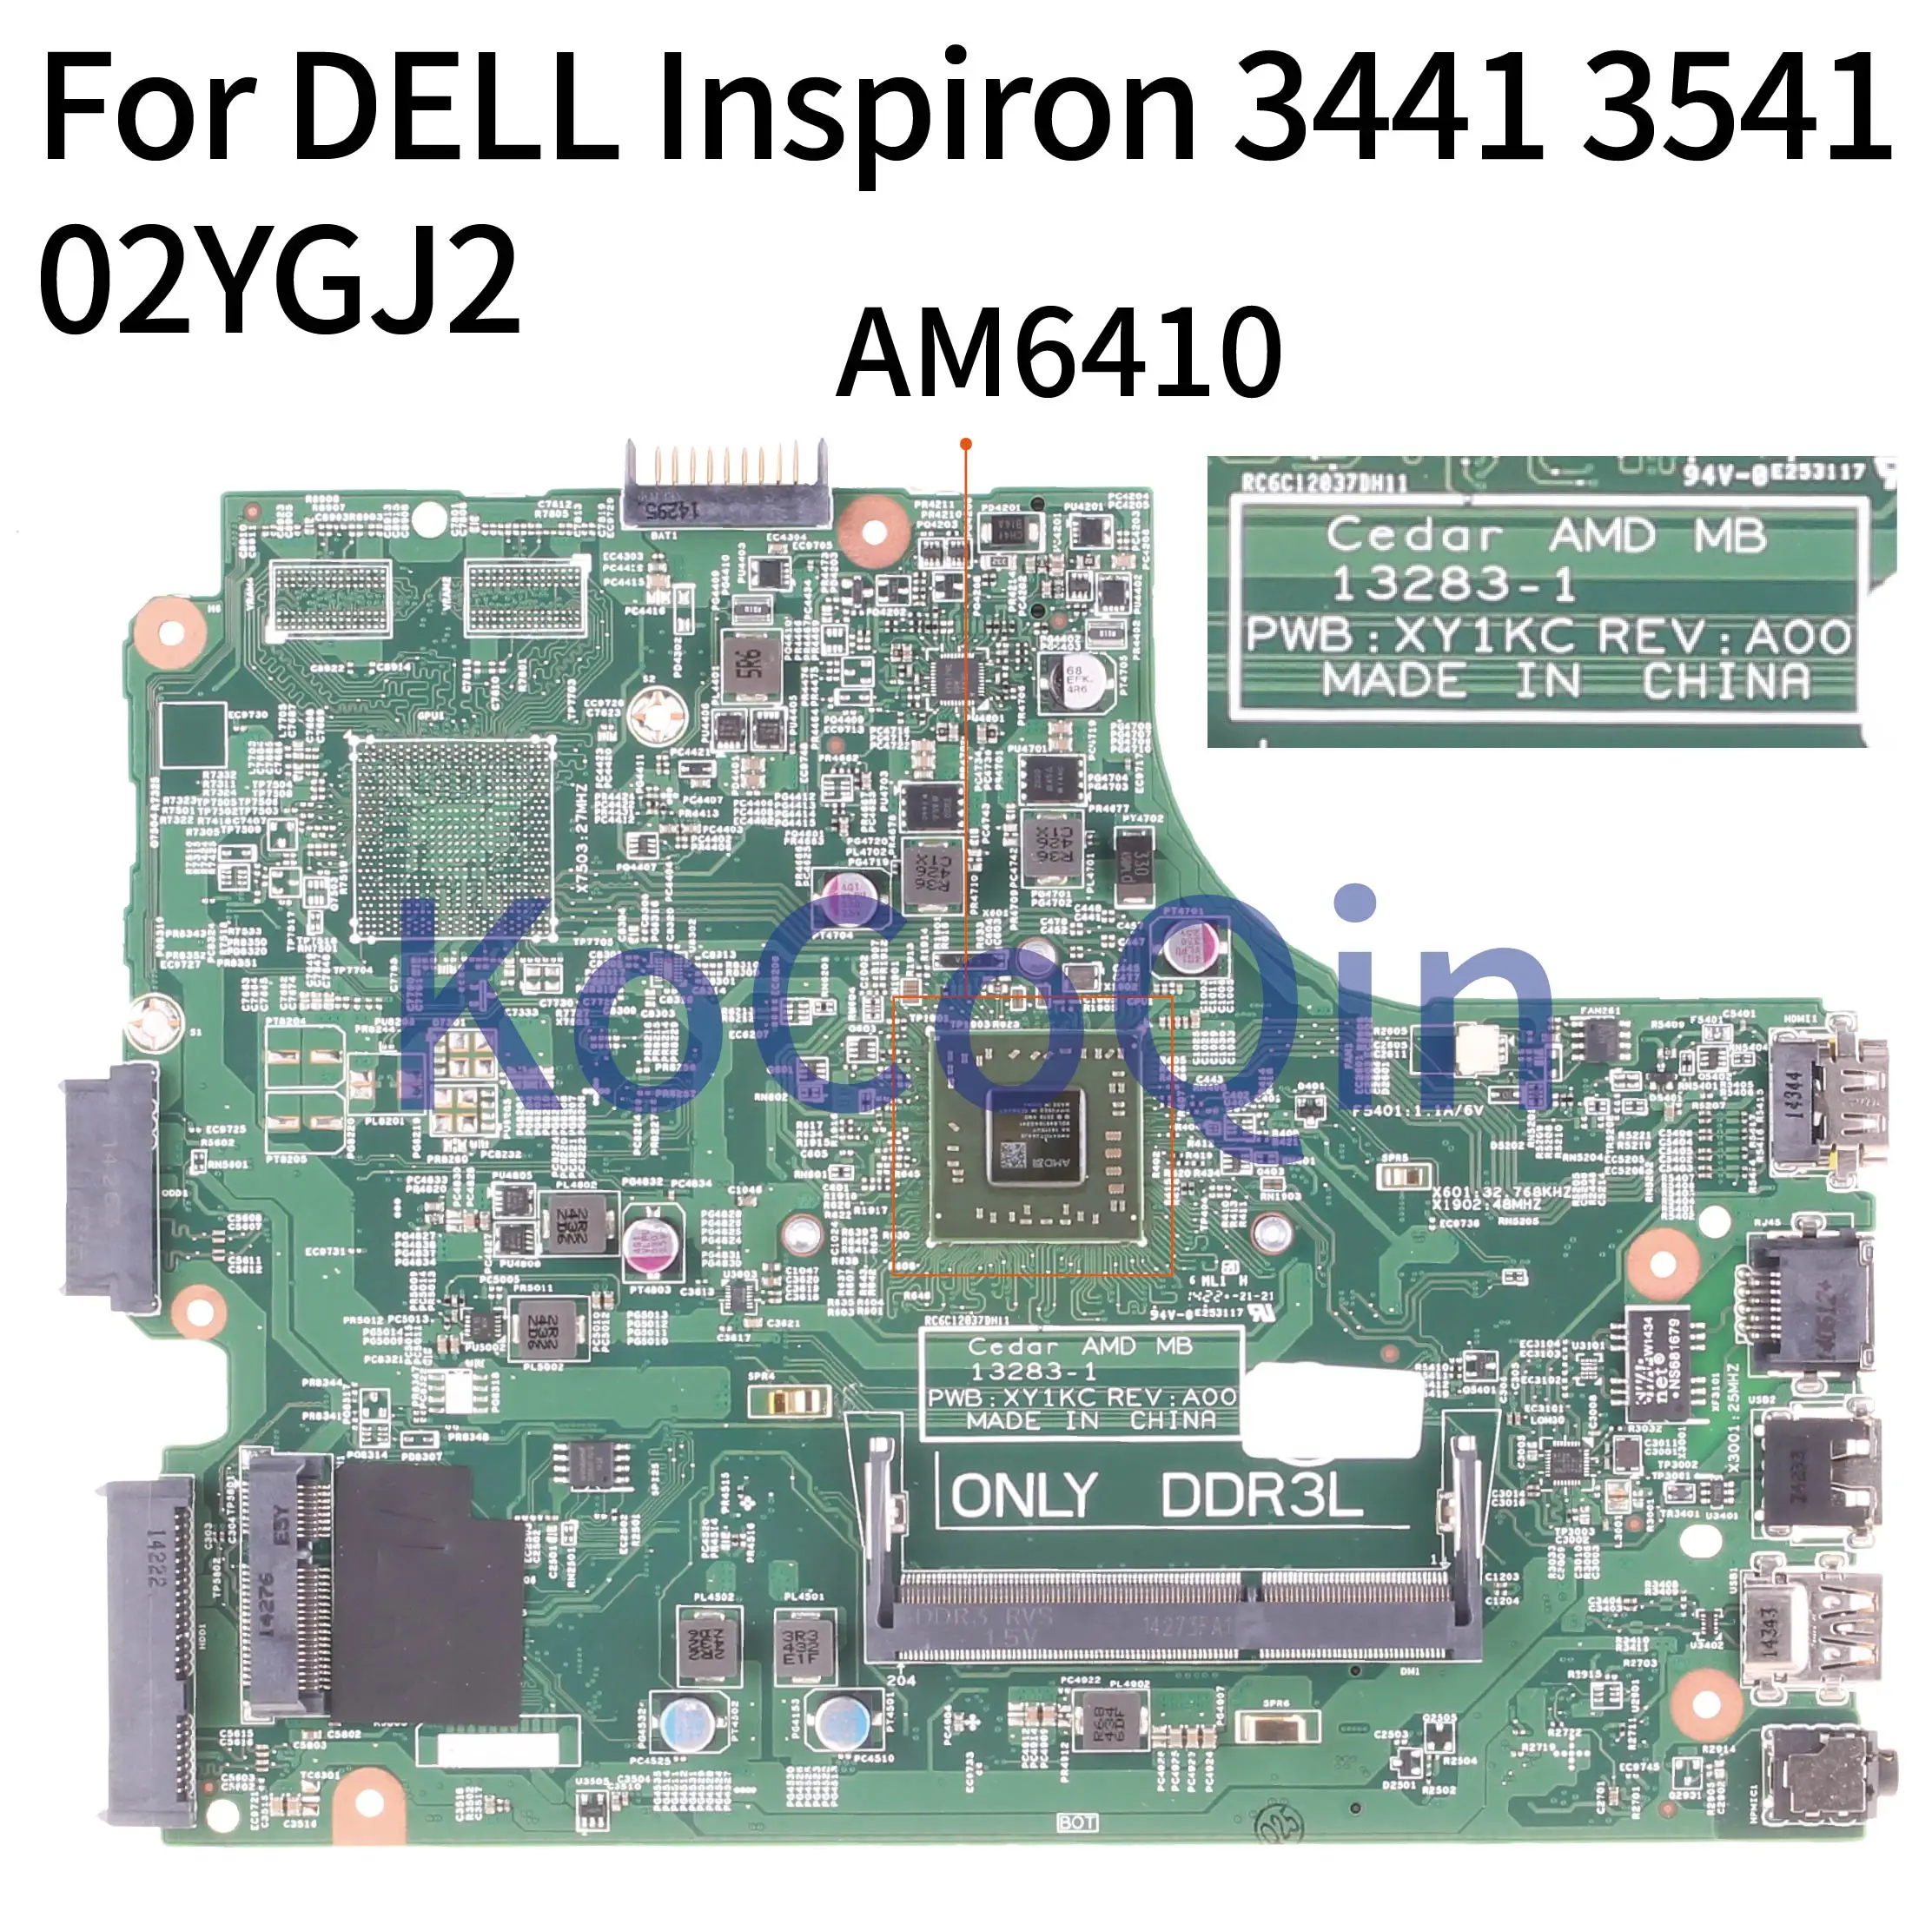 Hot Product  KoCoQin Laptop motherboard For DELL Inspiron 3441 3541 AM6410 Mainboard 13283-1 CN-02YGJ2 02YGJ2